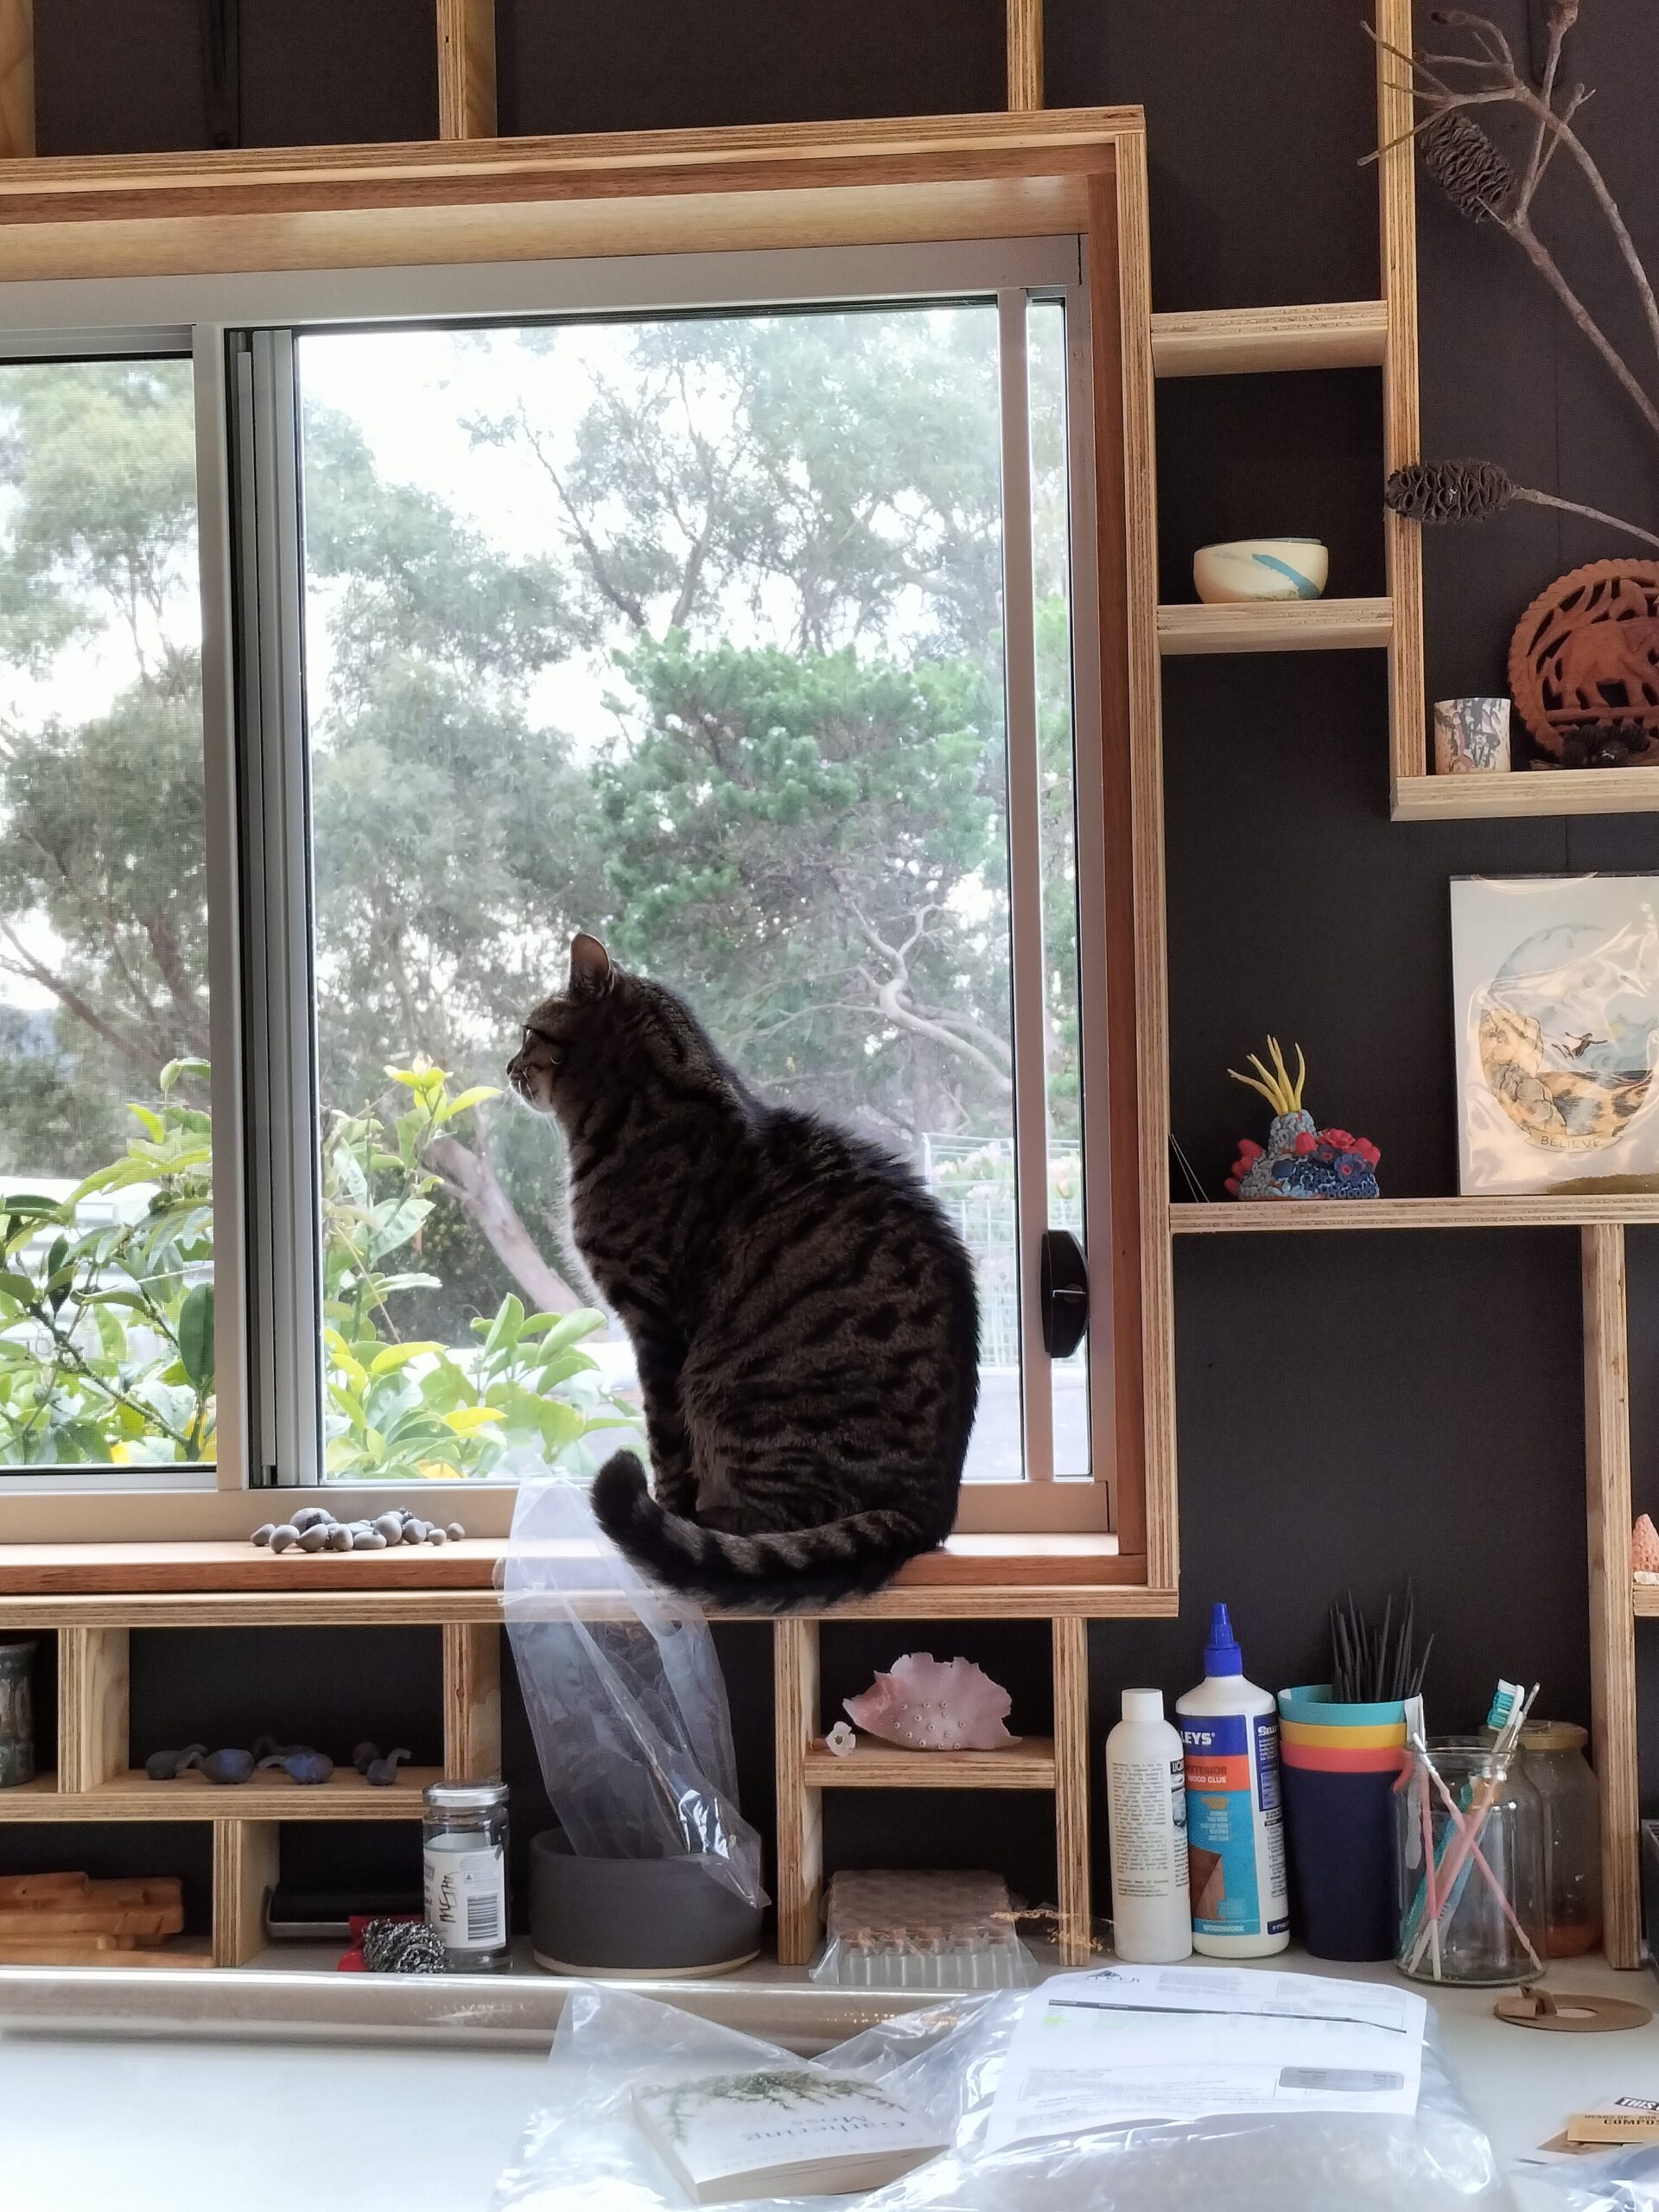 Image shows the studio art therapy cat by Christie Lange in her Artist Profile Art Trails Tasmania